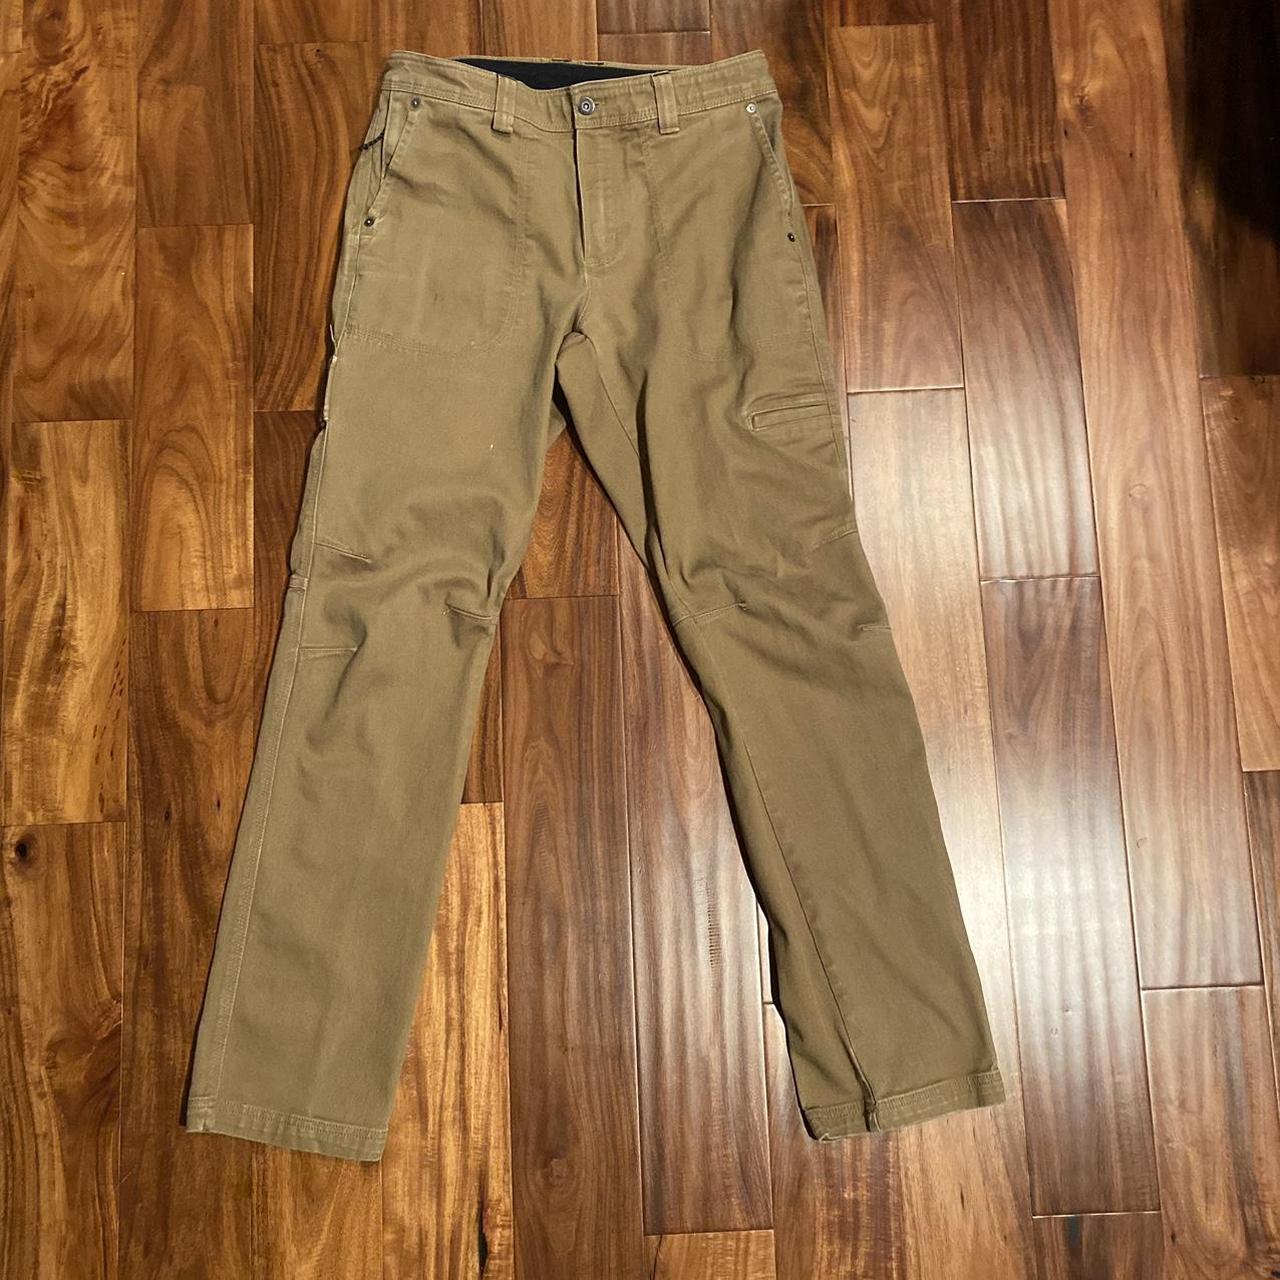 How to Remove Dried-on Ink Stains From Chino Pants | ehow